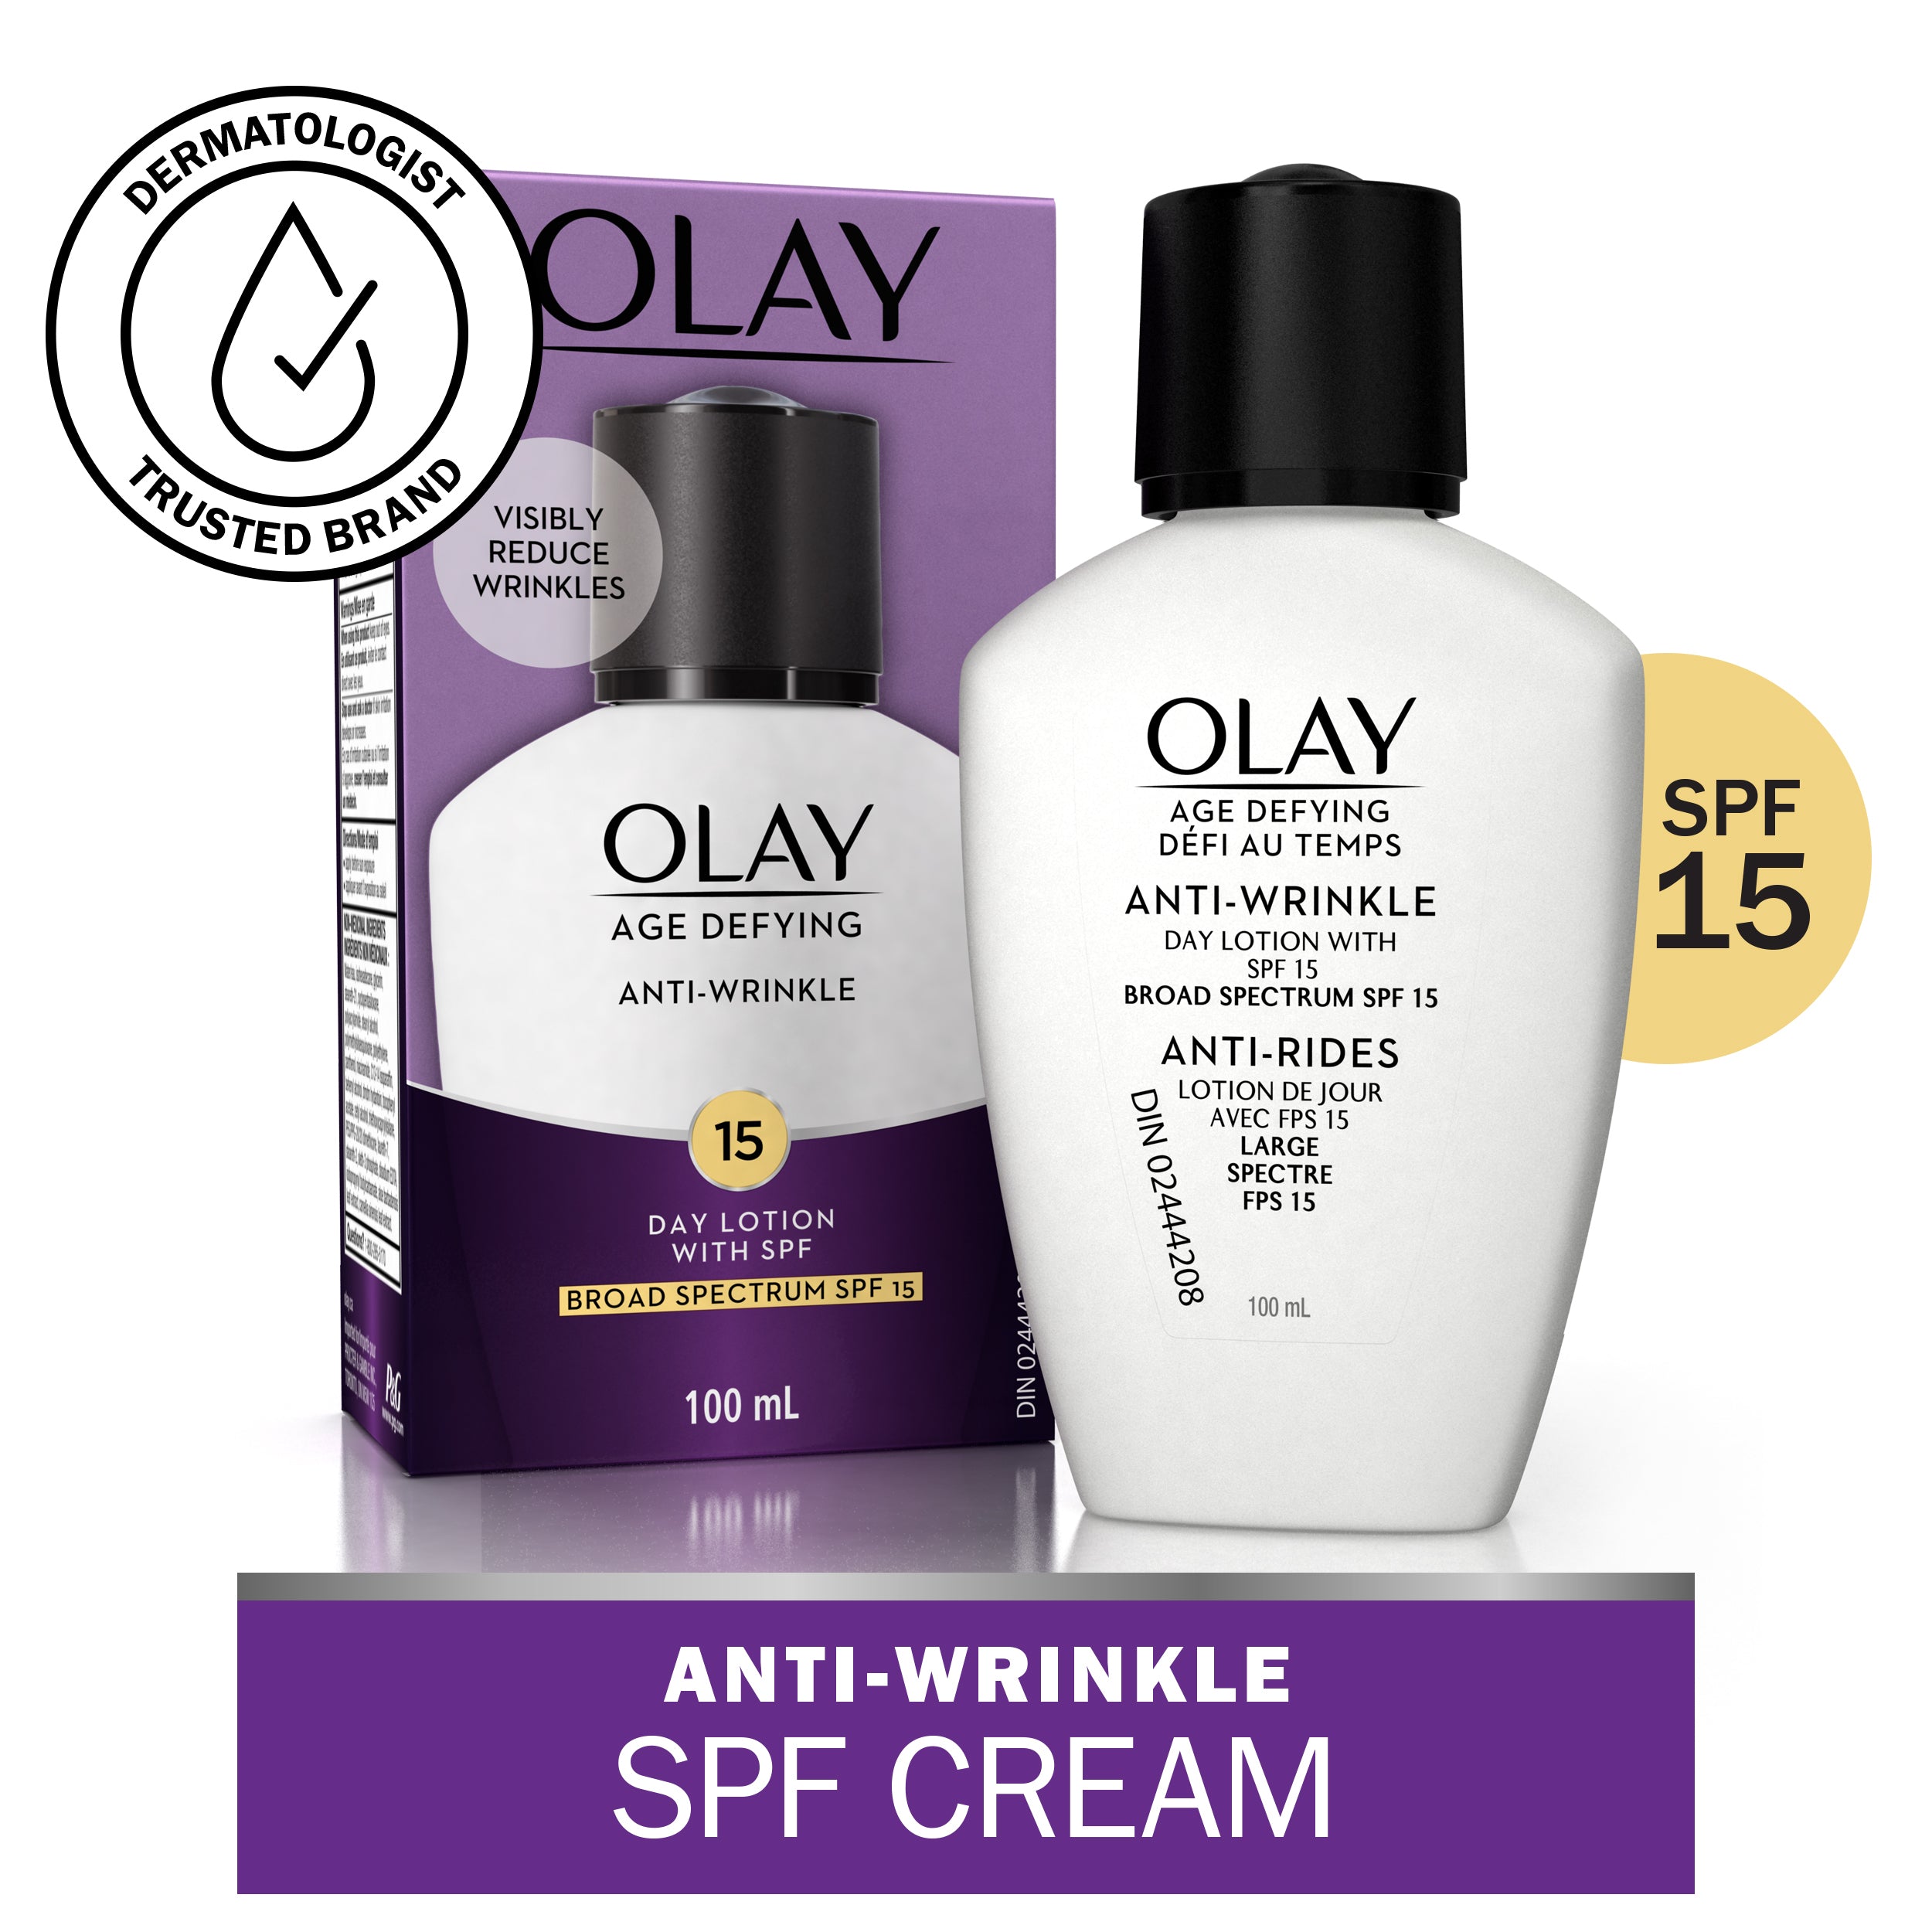 Olay Age Defying Anti-Wrinkle Day Face Lotion with Sunscreen SPF 15, For All Skin Types, 3.4 fl oz | MTTS317